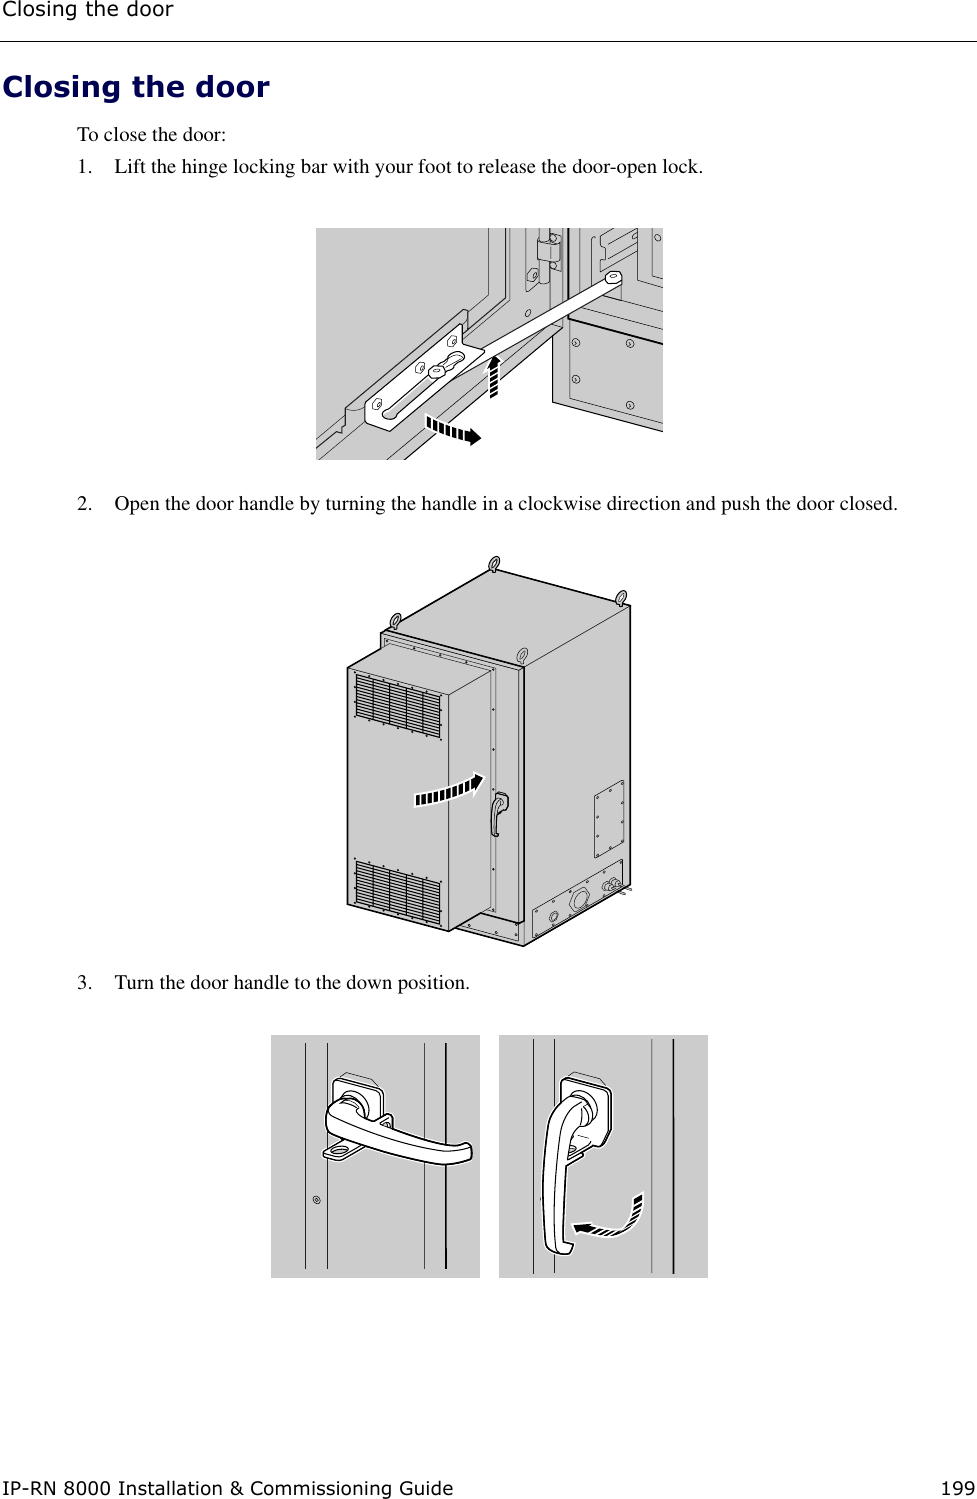 Closing the doorIP-RN 8000 Installation &amp; Commissioning Guide 199Closing the doorTo close the door:1. Lift the hinge locking bar with your foot to release the door-open lock.2. Open the door handle by turning the handle in a clockwise direction and push the door closed. 3. Turn the door handle to the down position.